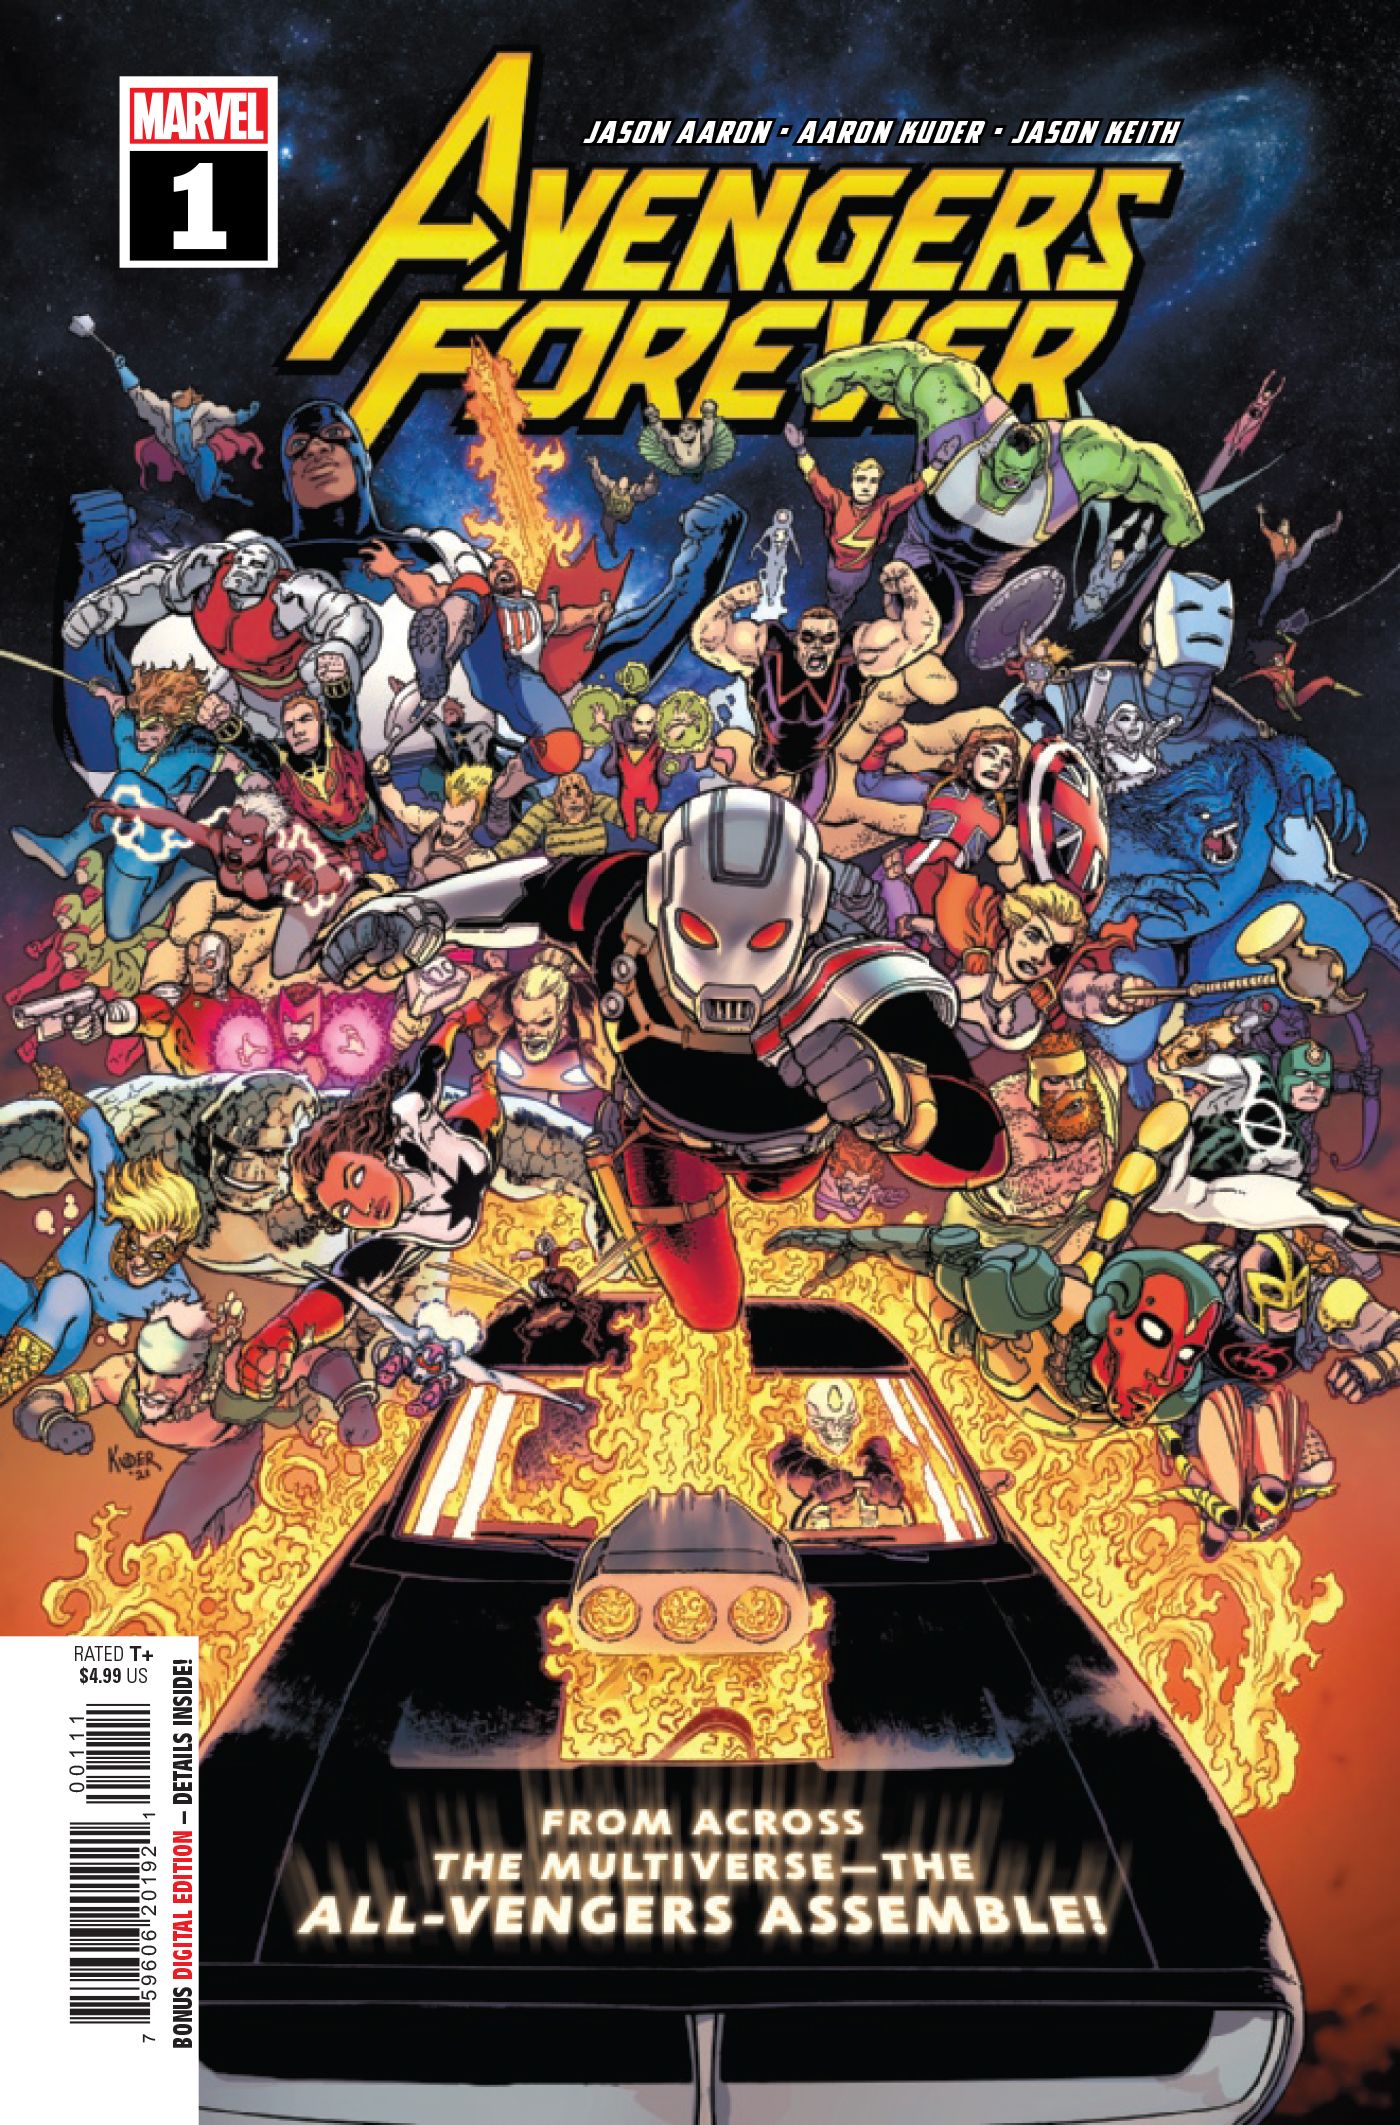 The cover for Avengers Forever shows off a Multiversal Avengers.